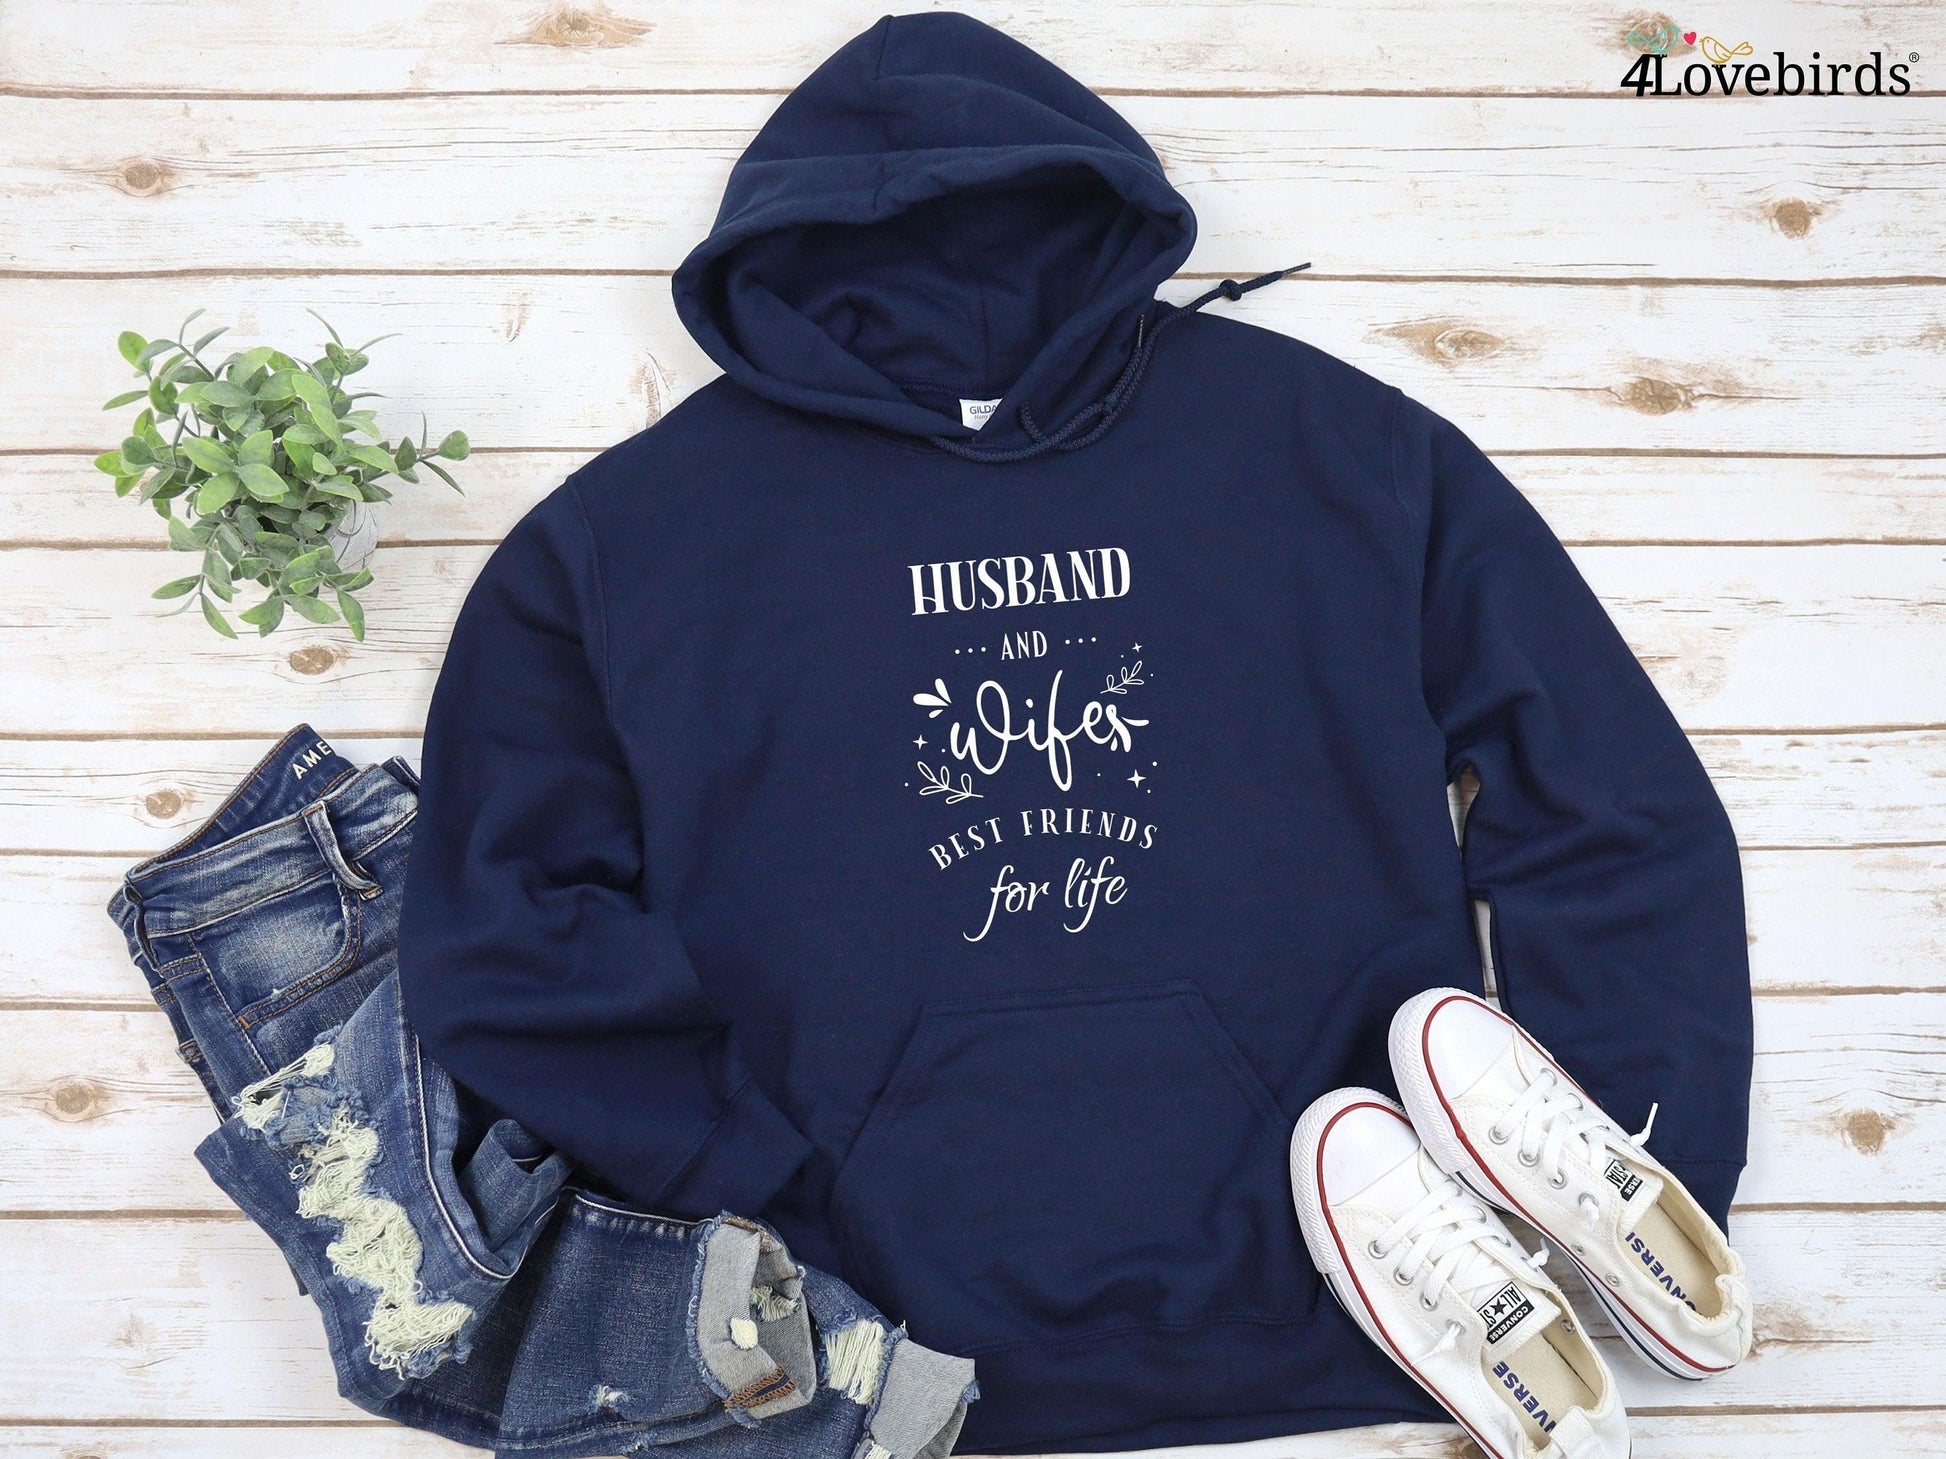 Husband and wife Best friends for life Hoodie, Lovers T-shirt, Gift for Couple, Valentine Sweatshirt, Married Couple Longsleeve, Cute Tshirt - 4Lovebirds